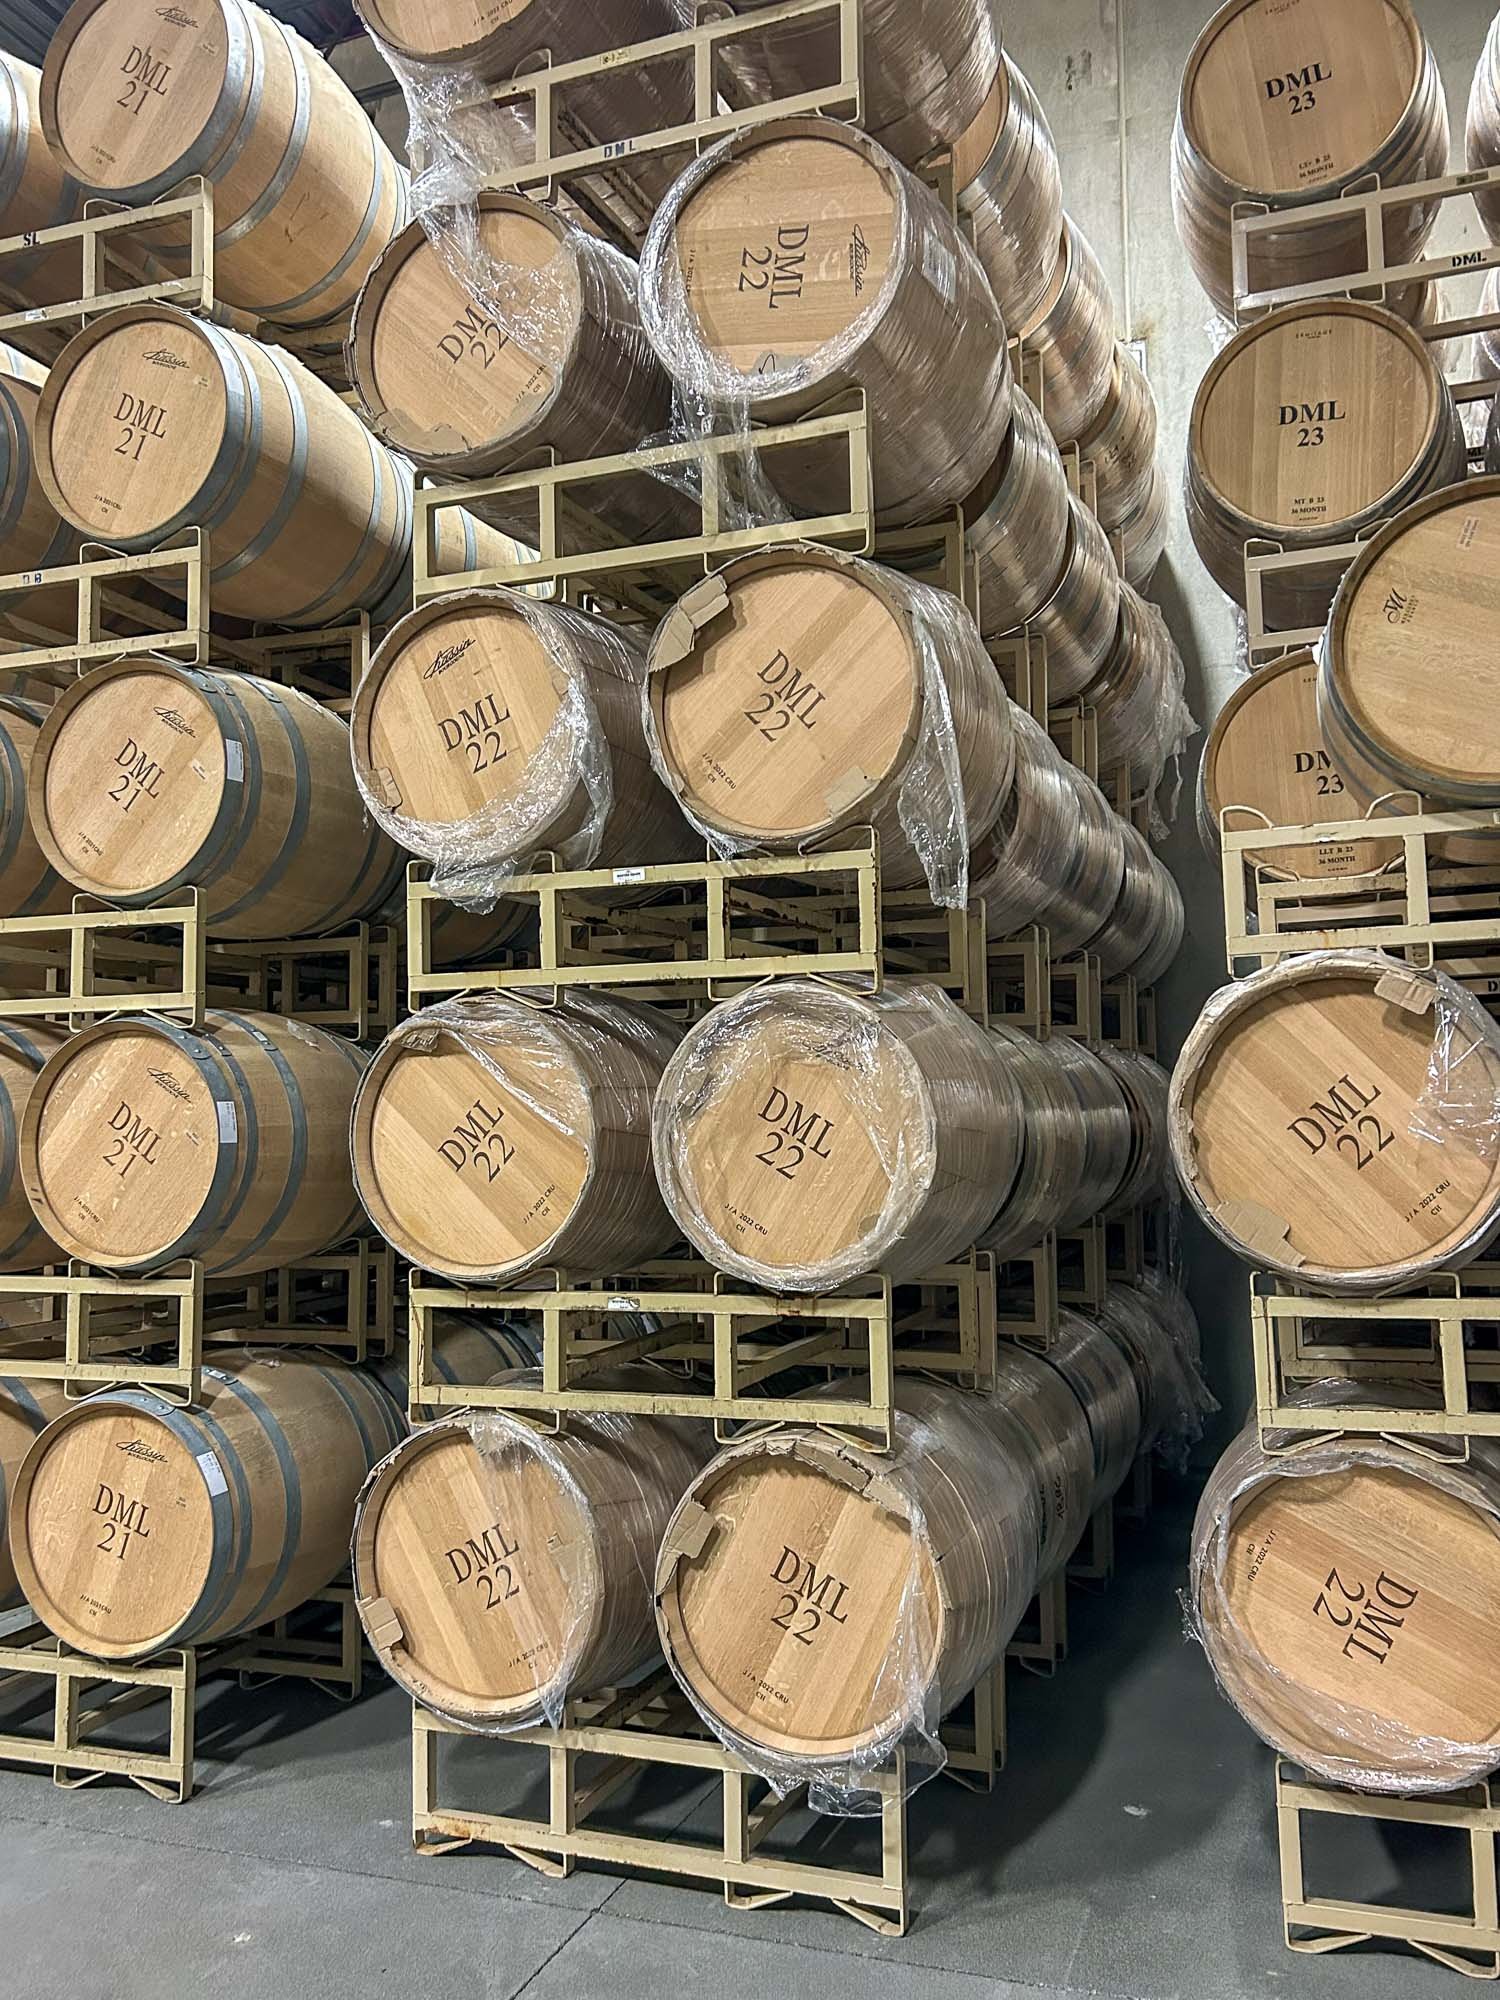 New oak barrels waiting to be "pressed" into action